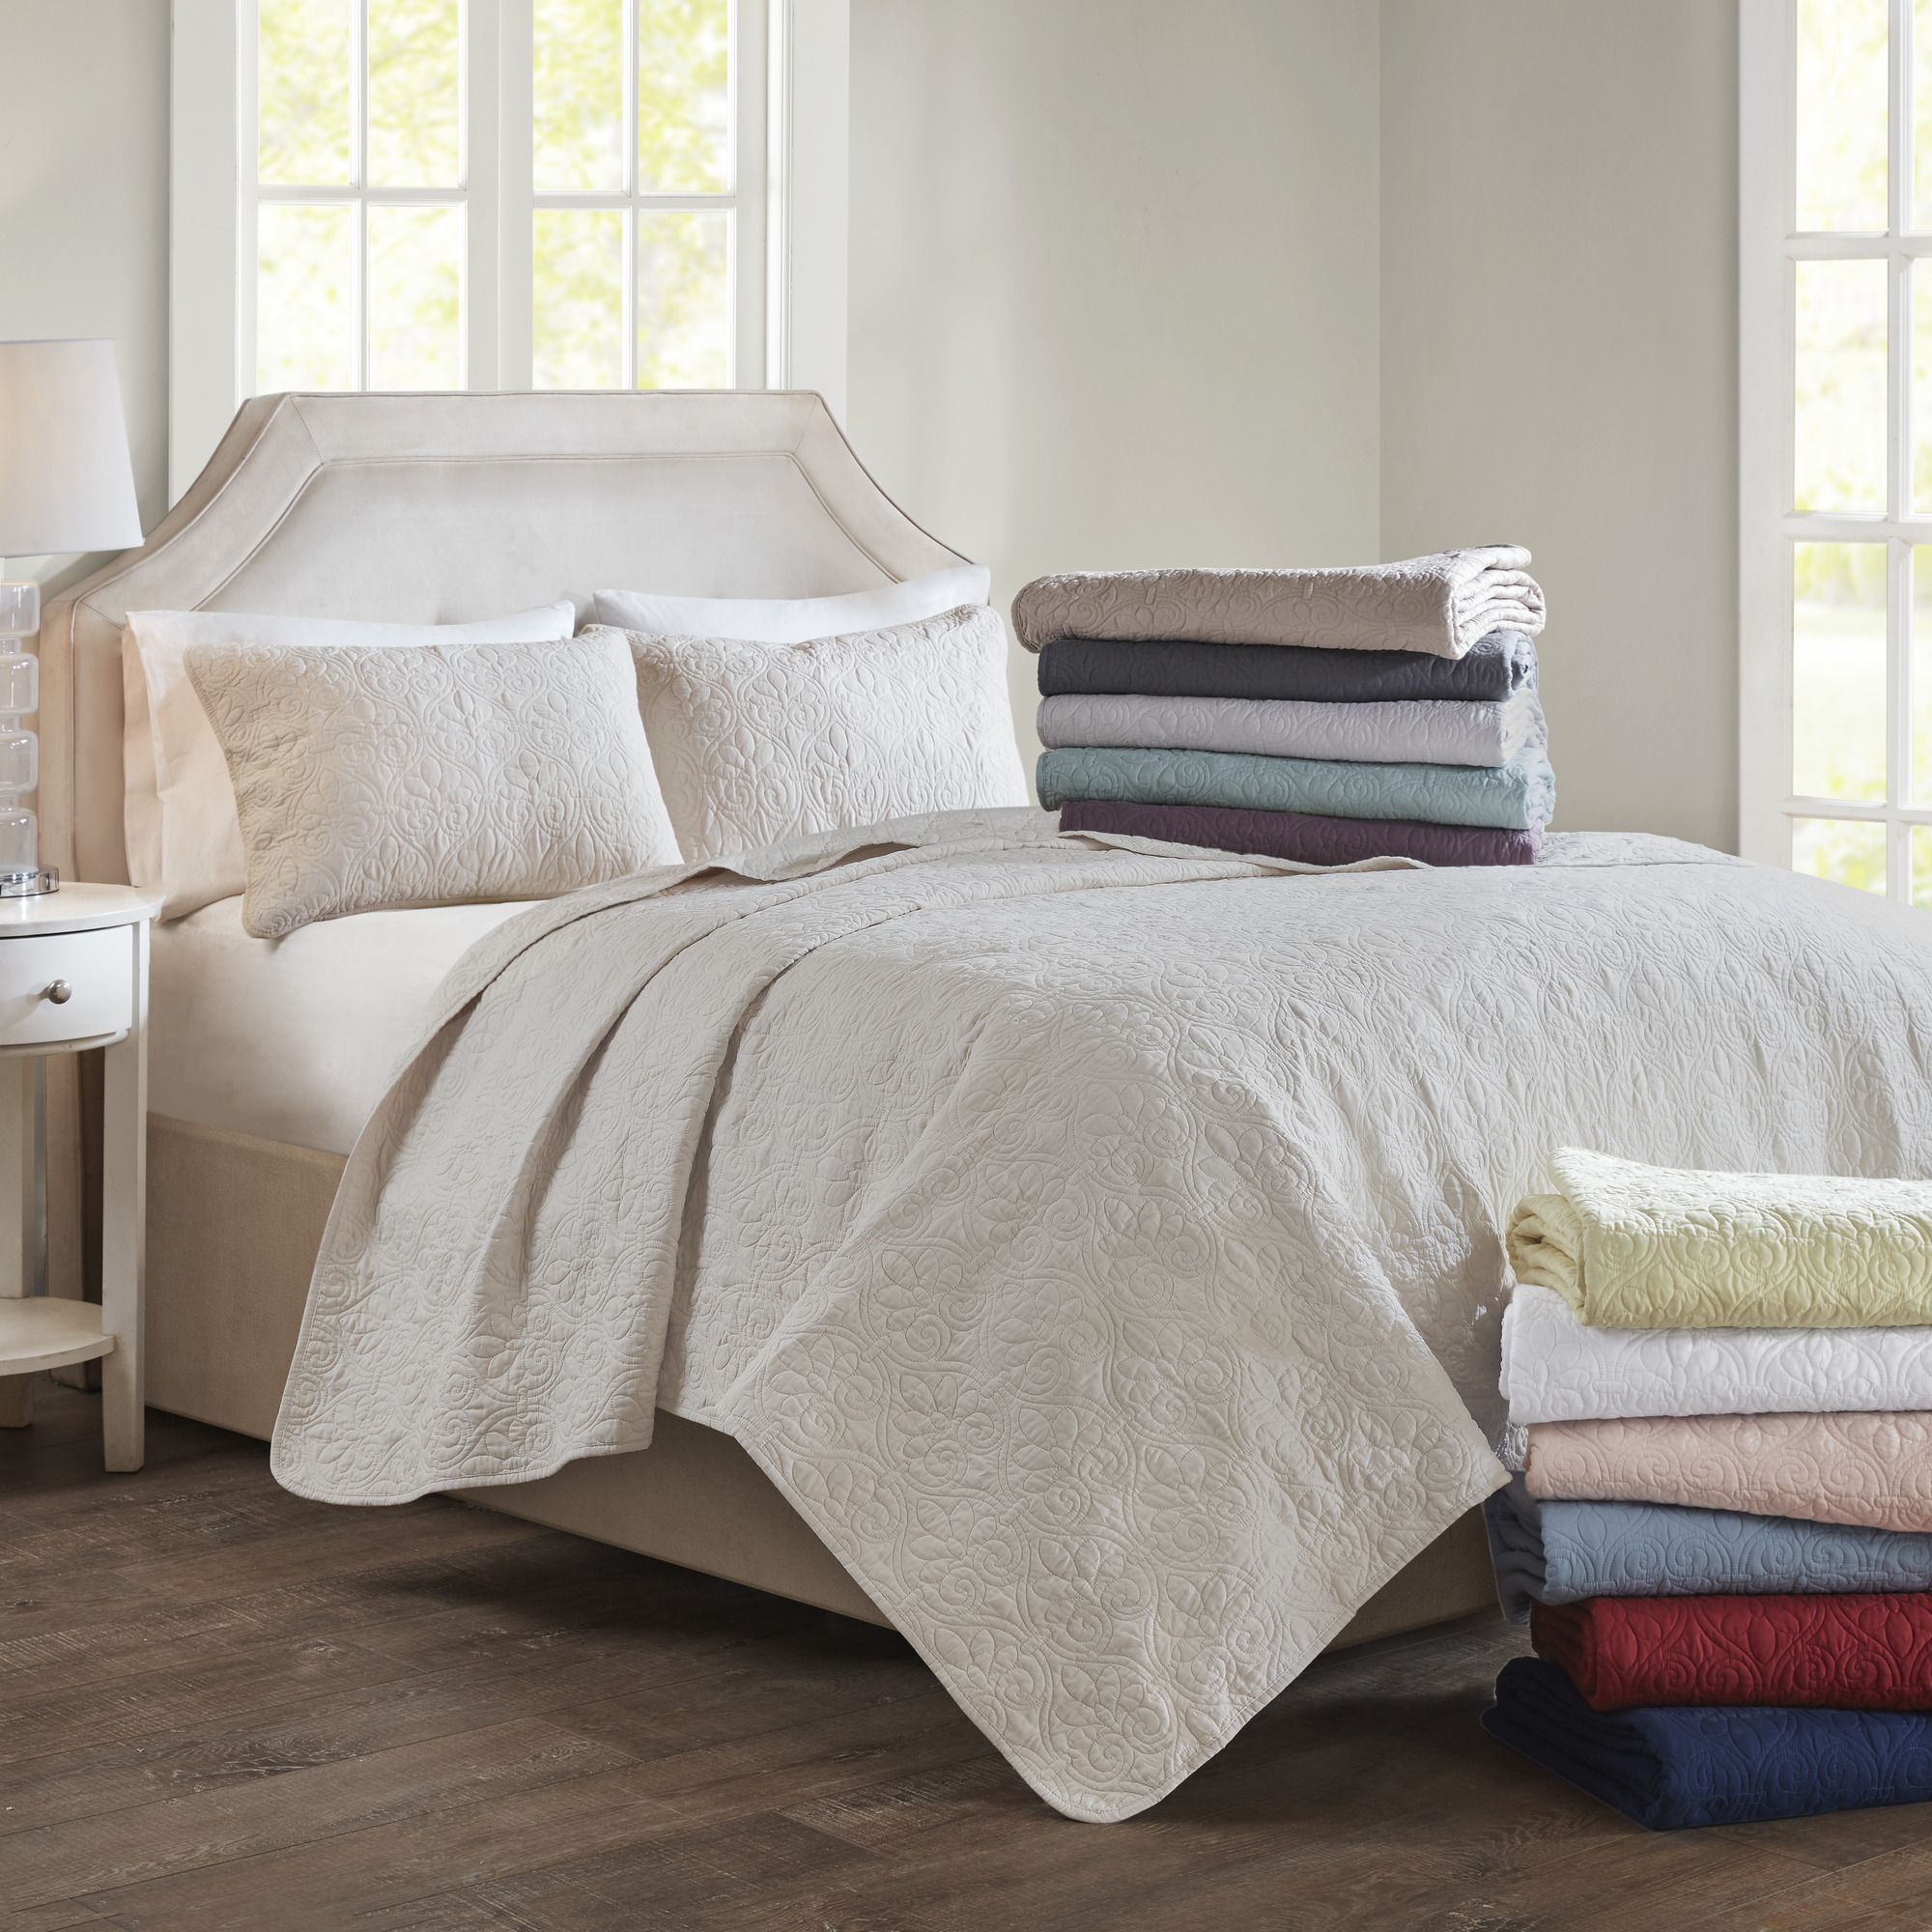 Home Essence Vancouver Super Soft Reversible Coverlet Set, King/Cal King, White - image 4 of 14